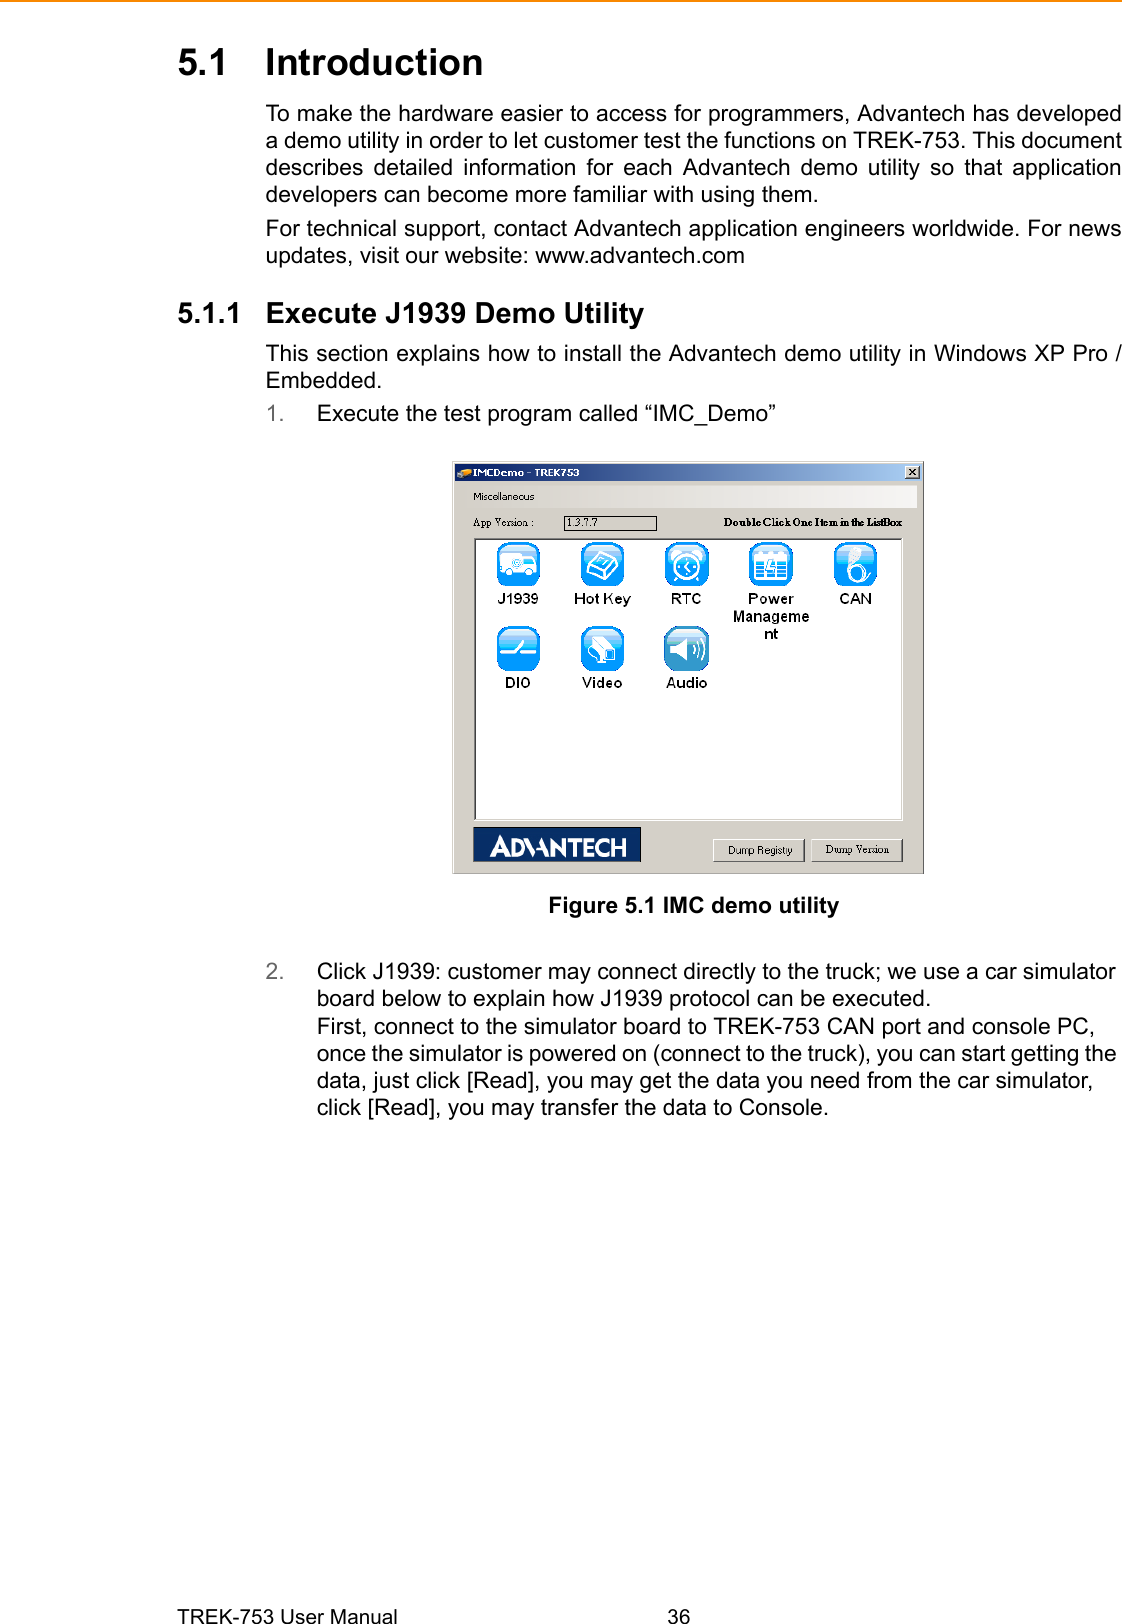 TREK-753 User Manual 365.1 IntroductionTo make the hardware easier to access for programmers, Advantech has developeda demo utility in order to let customer test the functions on TREK-753. This documentdescribes detailed information for each Advantech demo utility so that applicationdevelopers can become more familiar with using them.For technical support, contact Advantech application engineers worldwide. For newsupdates, visit our website: www.advantech.com5.1.1 Execute J1939 Demo UtilityThis section explains how to install the Advantech demo utility in Windows XP Pro /Embedded.1. Execute the test program called “IMC_Demo”Figure 5.1 IMC demo utility2. Click J1939: customer may connect directly to the truck; we use a car simulator board below to explain how J1939 protocol can be executed. First, connect to the simulator board to TREK-753 CAN port and console PC, once the simulator is powered on (connect to the truck), you can start getting the data, just click [Read], you may get the data you need from the car simulator, click [Read], you may transfer the data to Console.